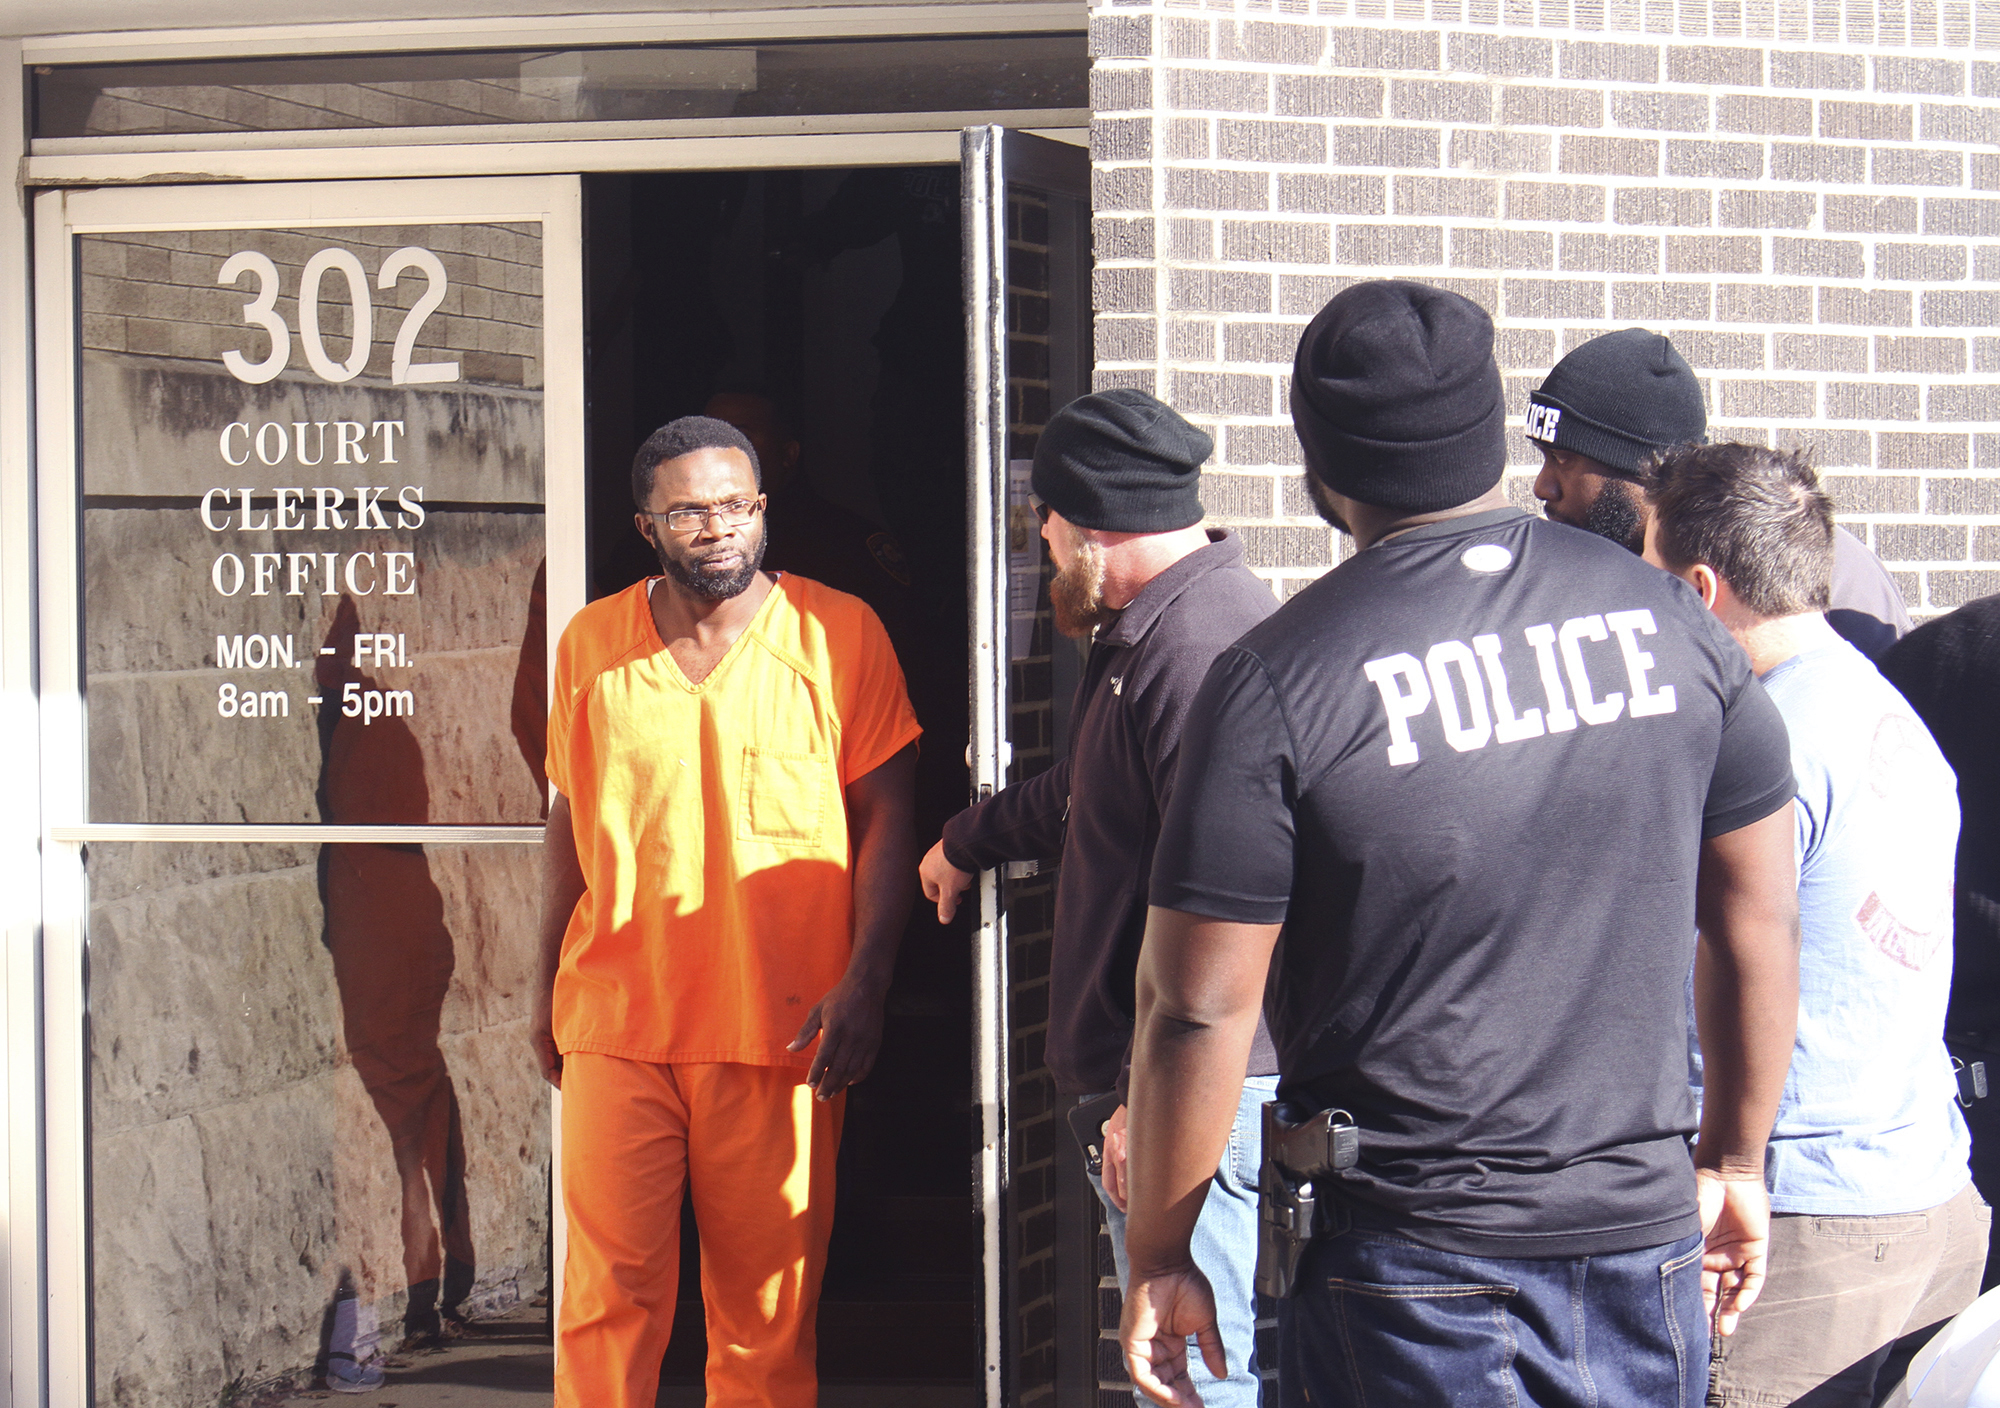 PHOTO: Accused arsonist Andrew McClinton is led from the Greenville Municipal Courthouse under heavy security following his arraignment, Dec. 22, 2016 in Greenville, Miss.